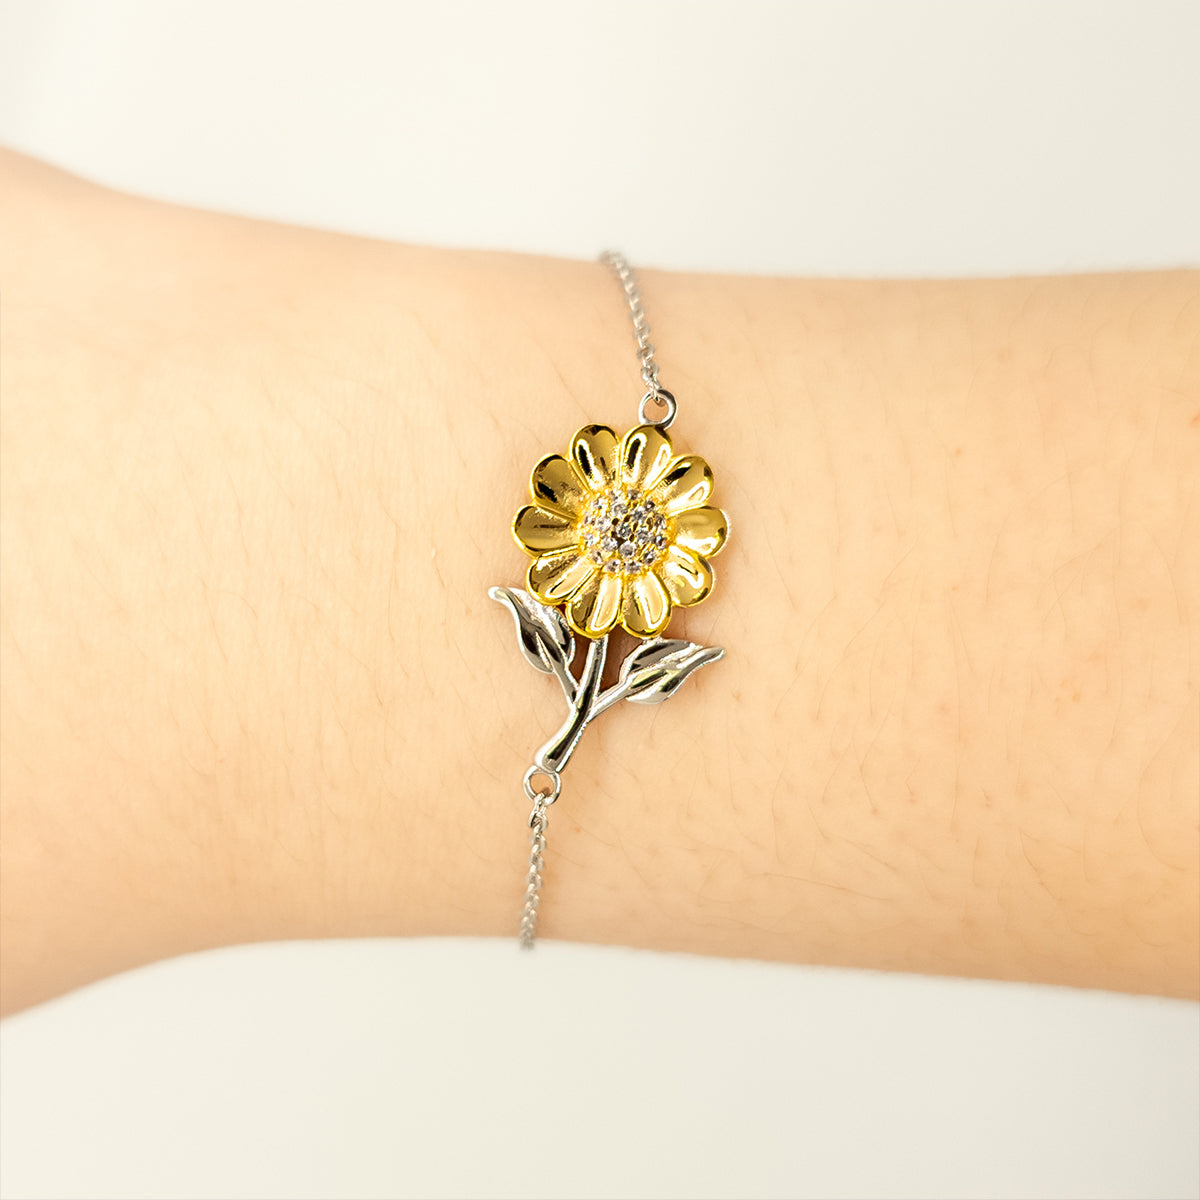 Sunflower Bracelet for Mom In Law - Engraved with Special Place in My Heart - Perfect Mothers Day Gift to Show Appreciation and Love